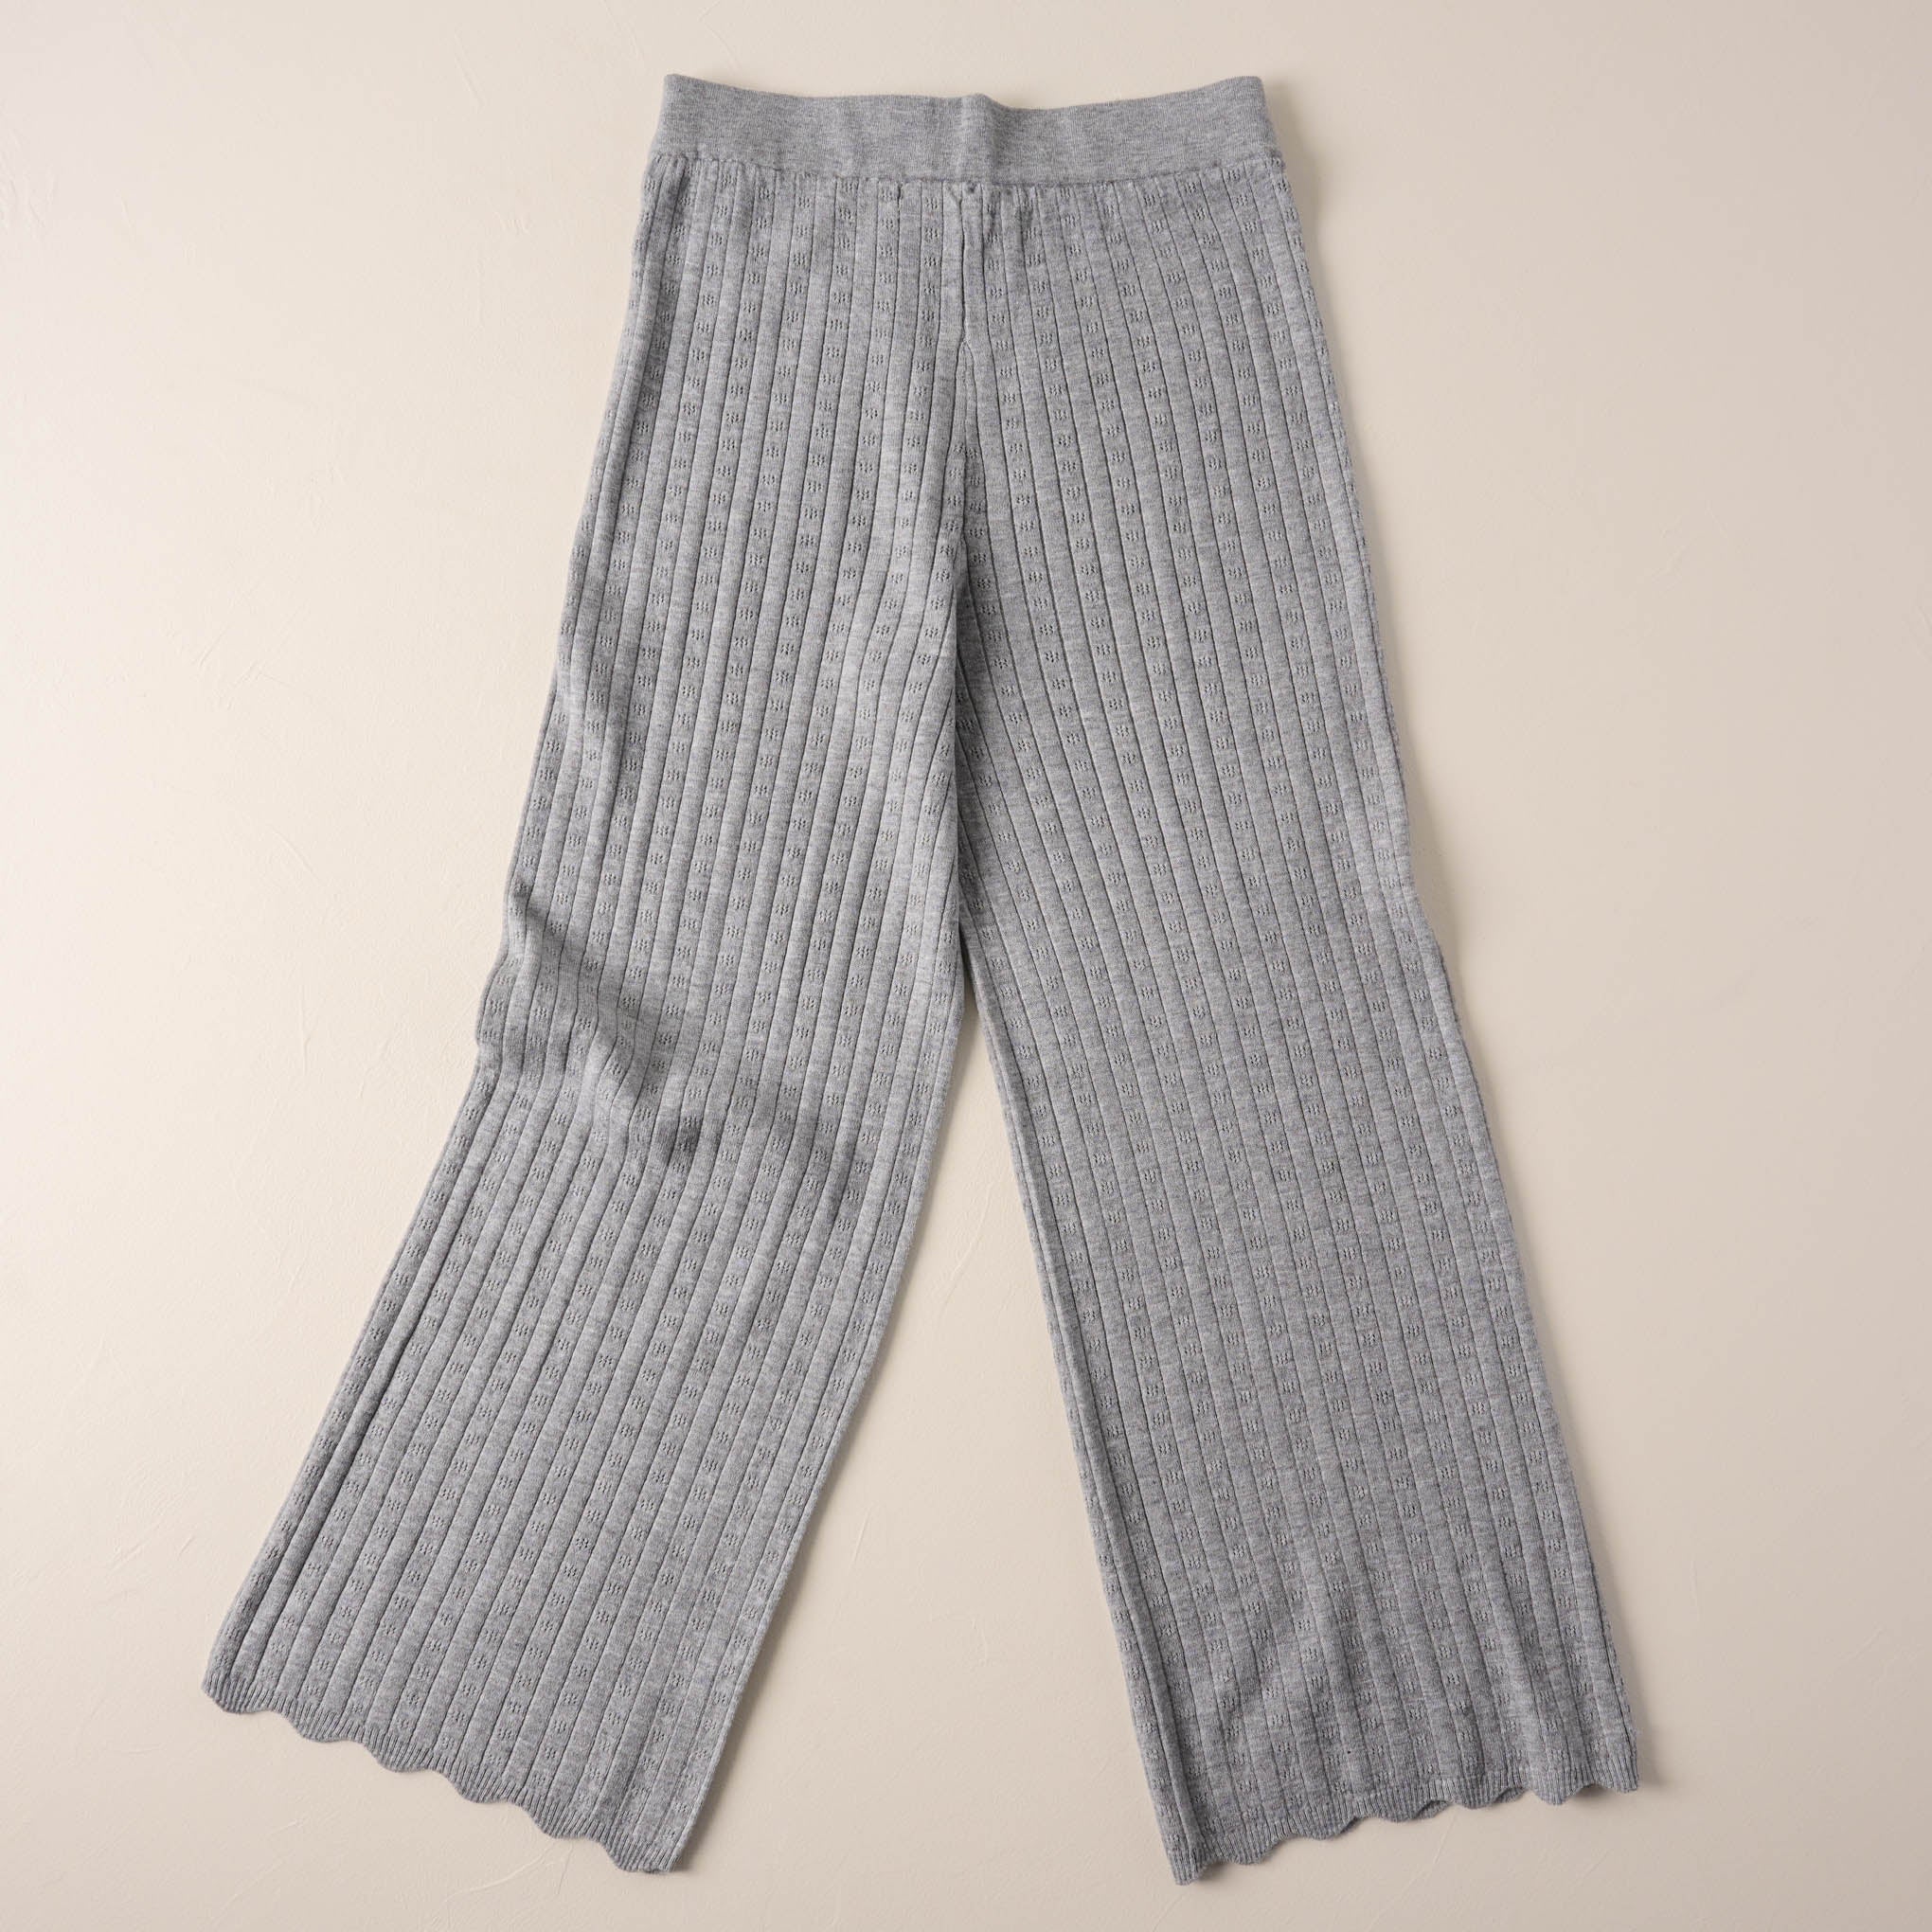 Pointelle French Grey Pant $58.00